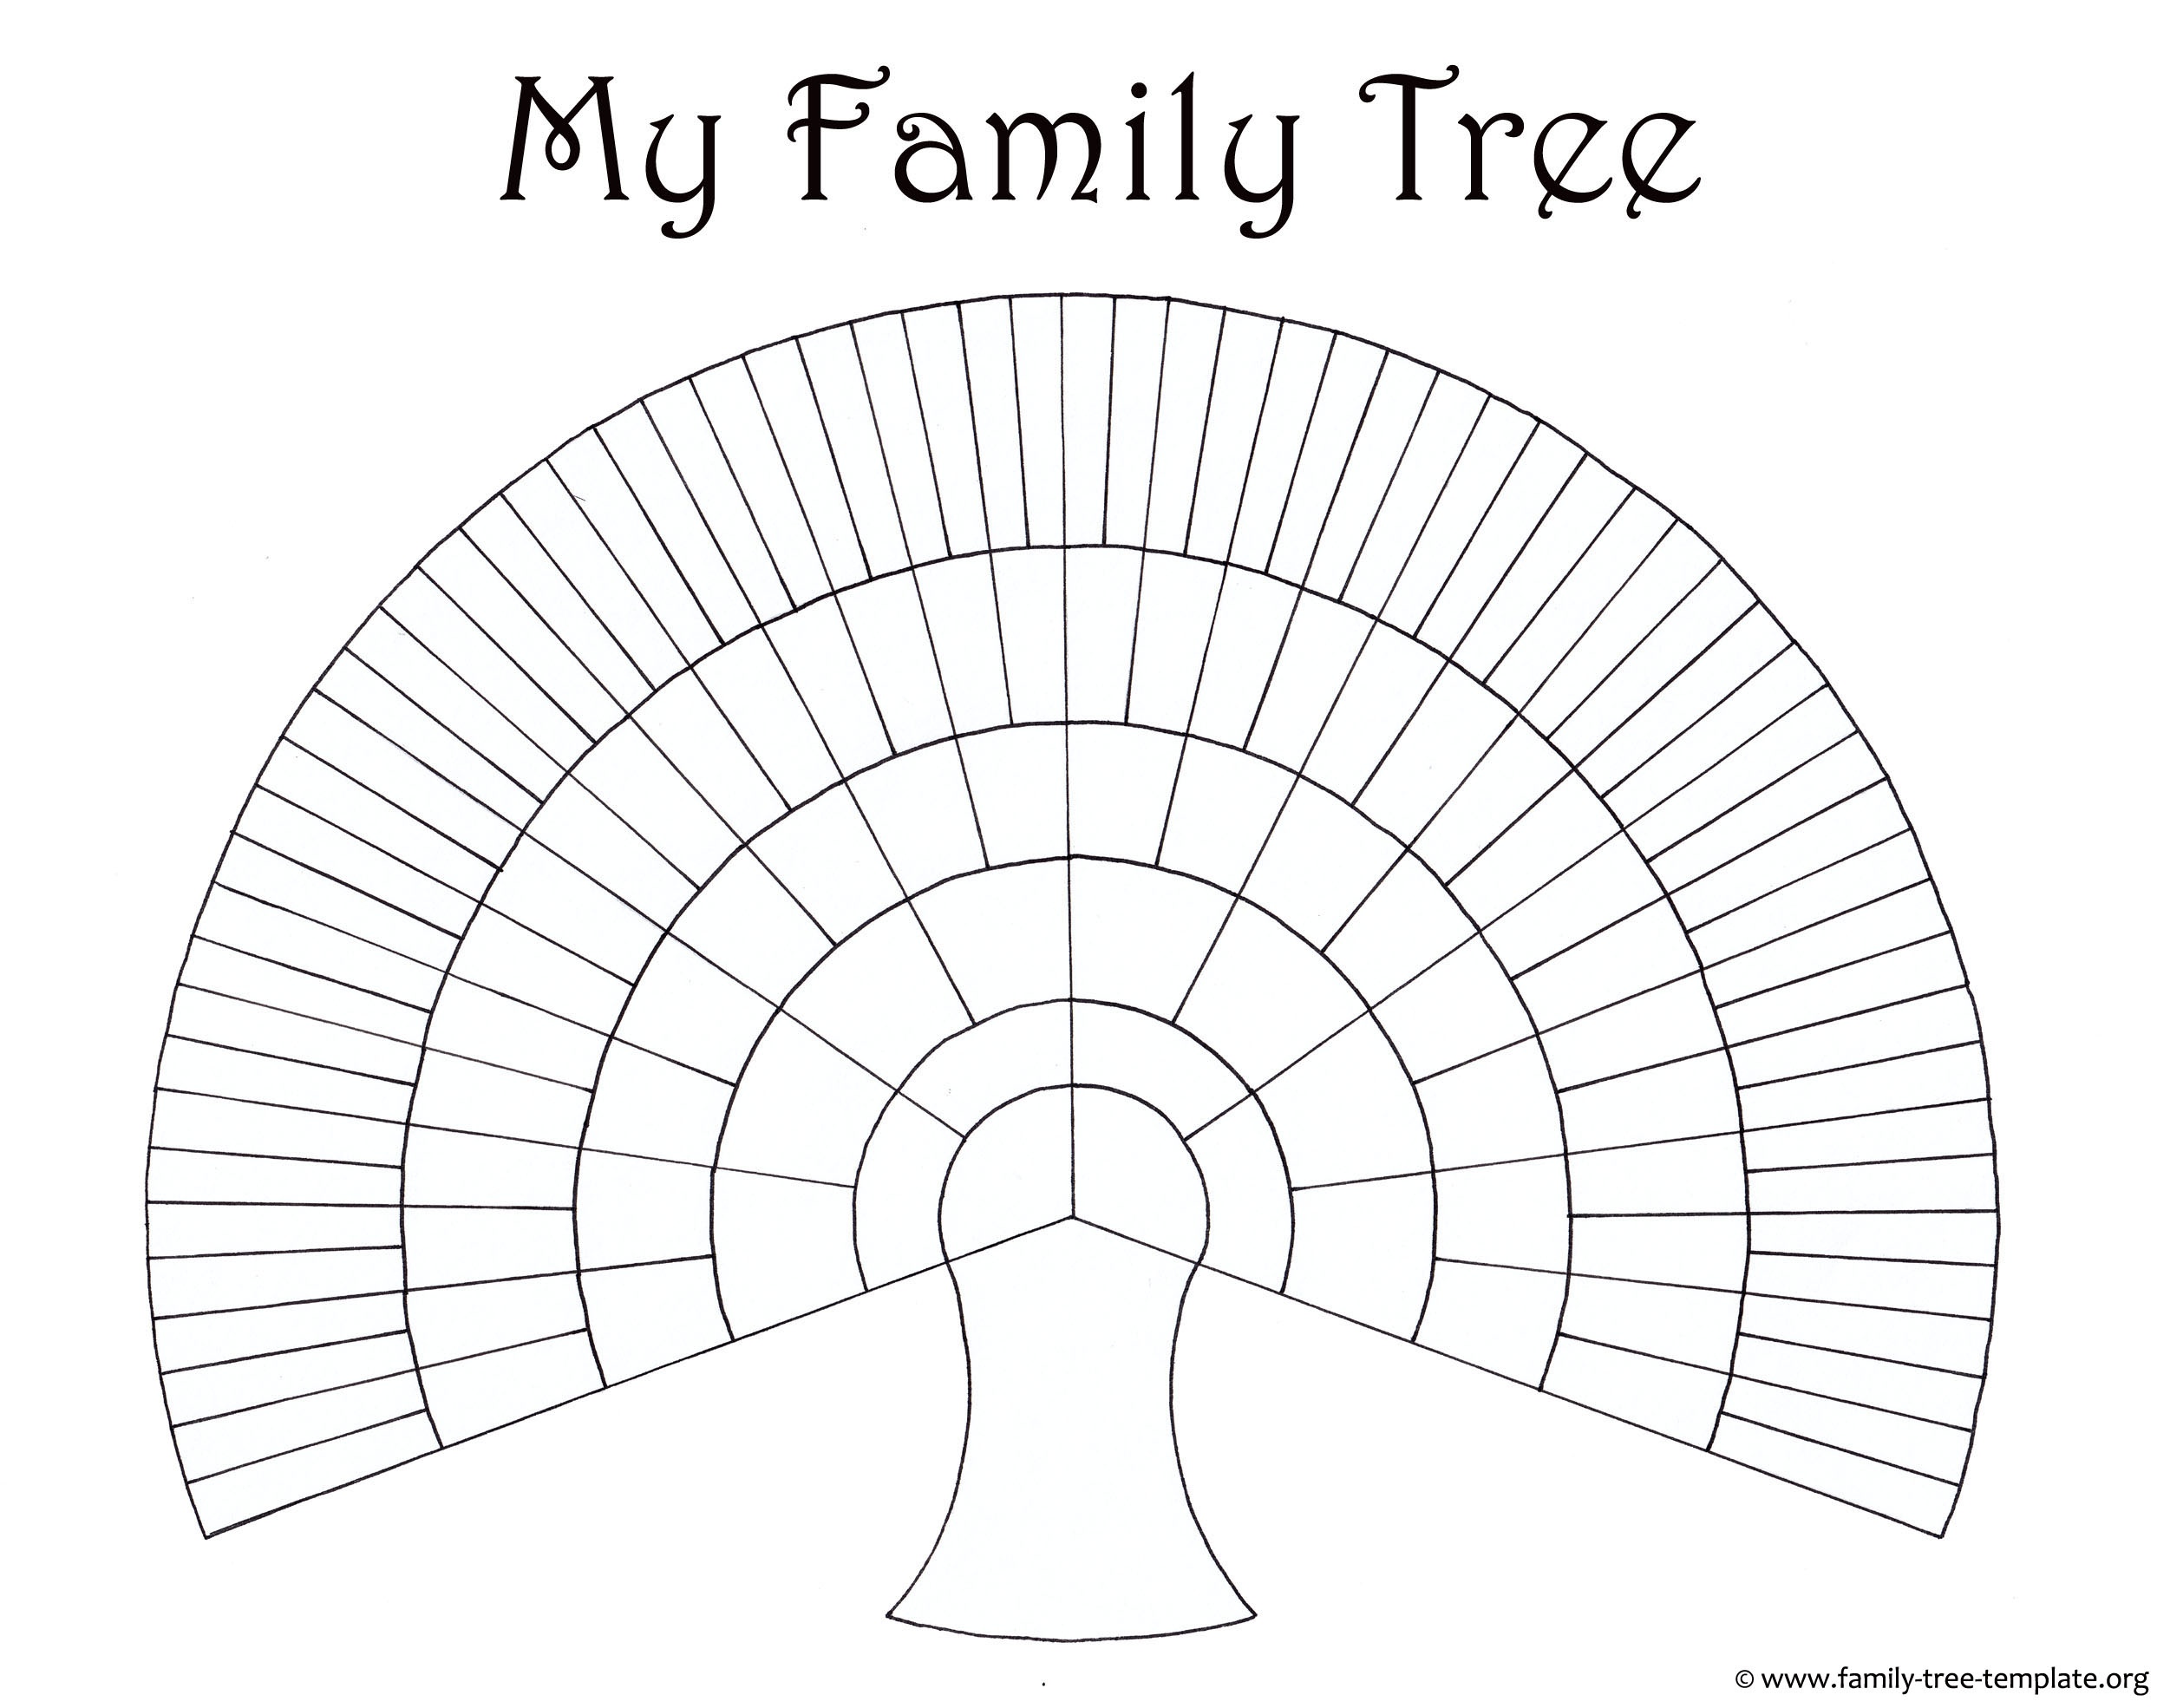 Blank Family Trees Templates And Free Genealogy Graphics - Free Printable Family Tree Charts